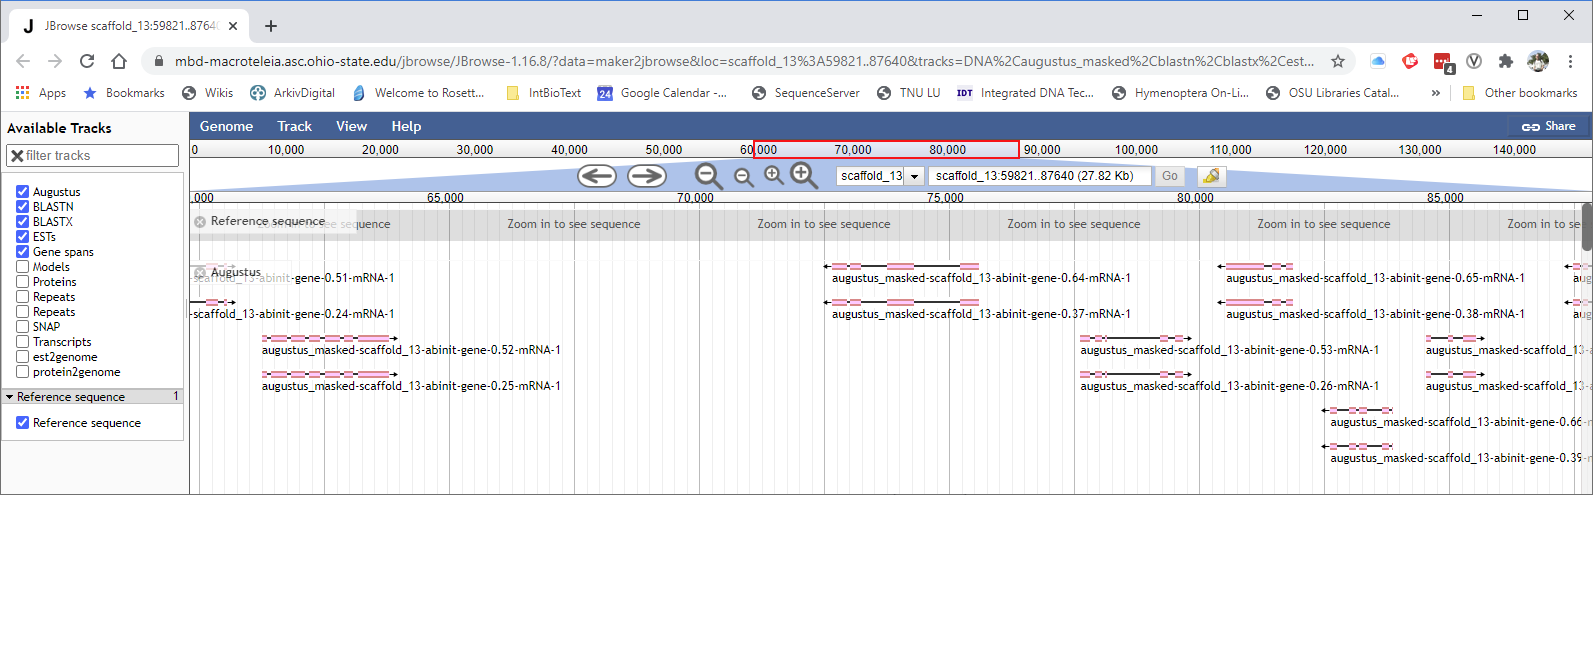 Screen capture of Trissolcus basalis genome in JBrowse